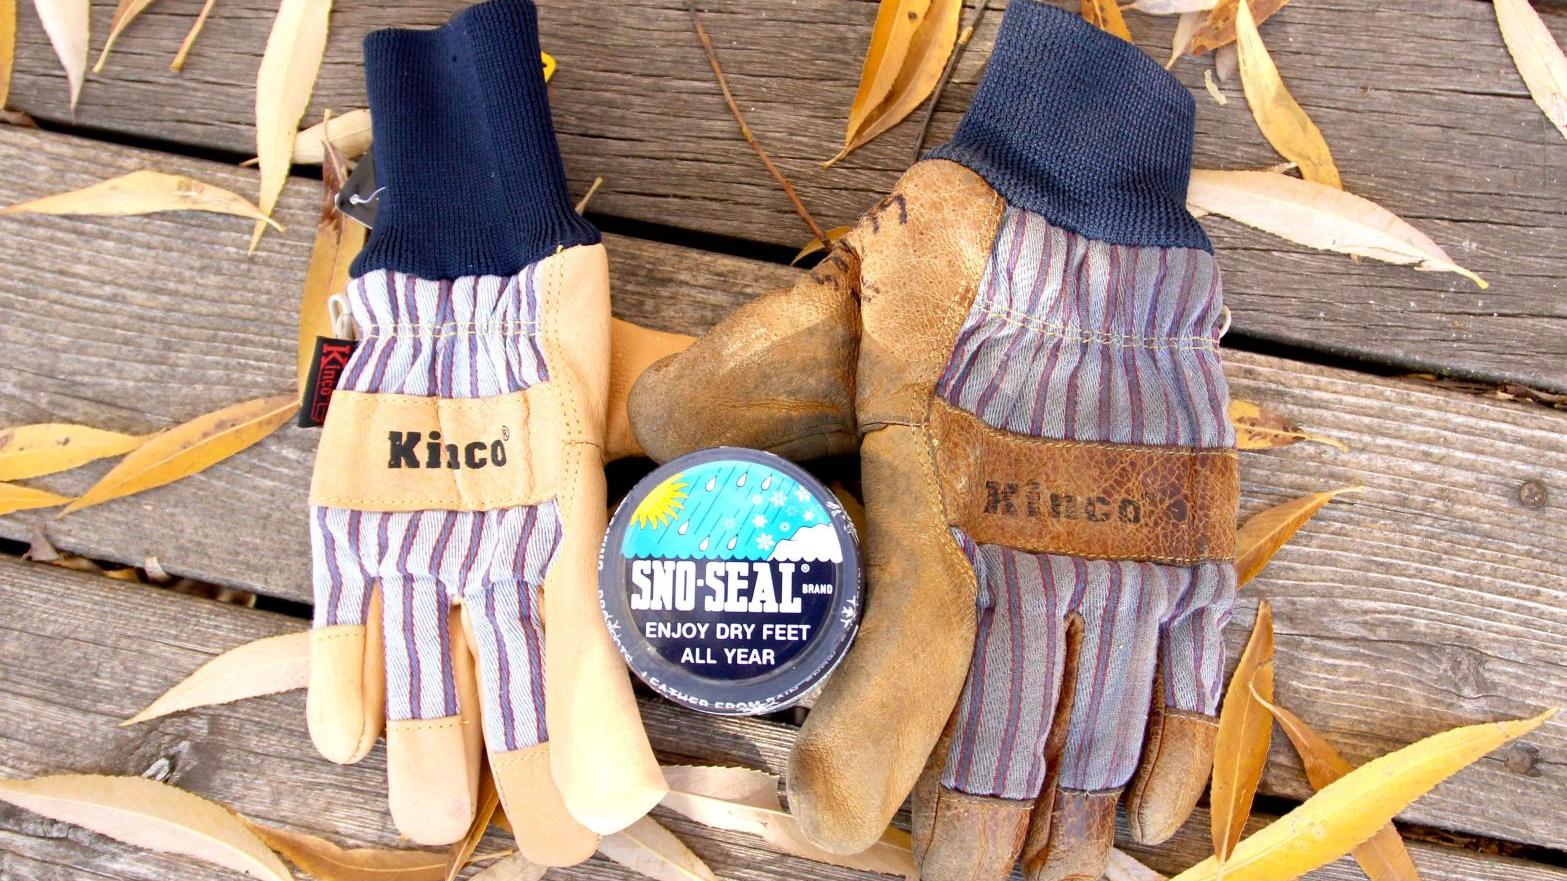 How To Sno Seal Kinco Gloves